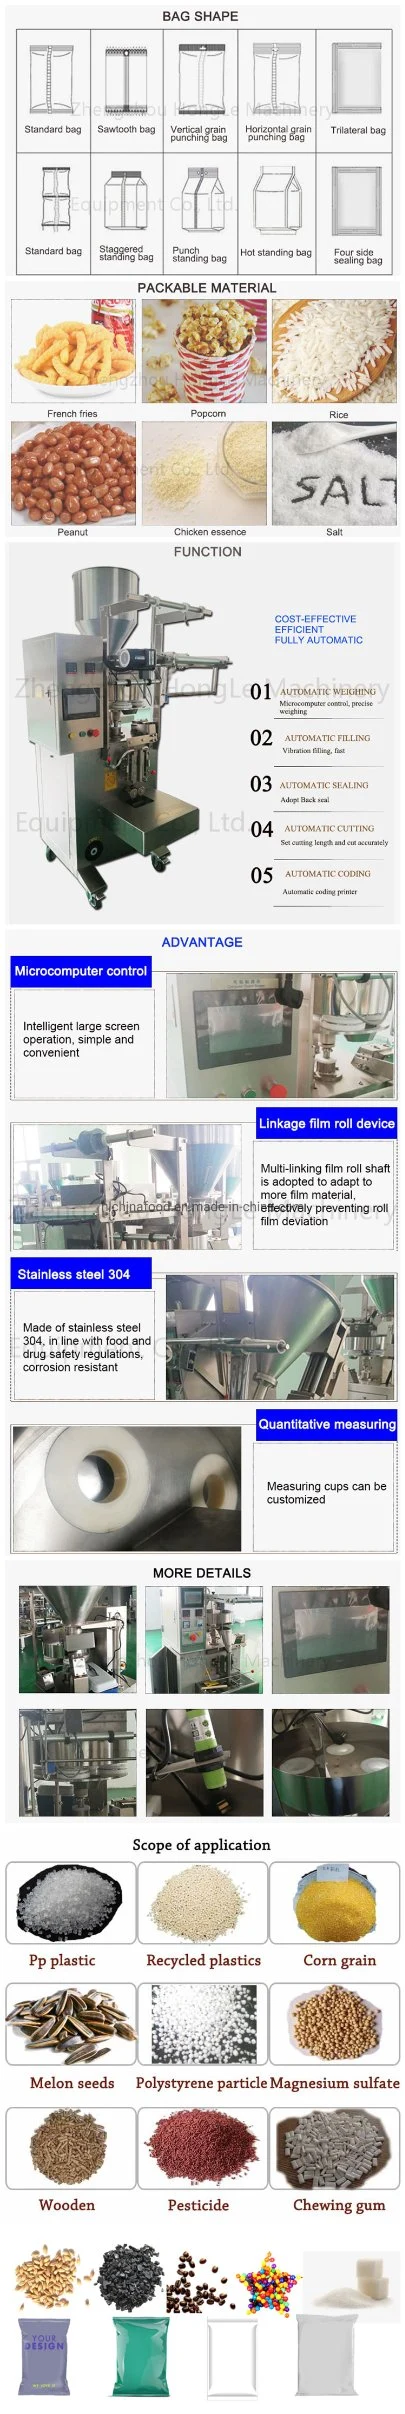 China Filling and Sealing Stainless Steel Frozen Fruits Vegetables Seeds Screw Rice Sugar Packing Machine 1kg 2kg 5 Kilo